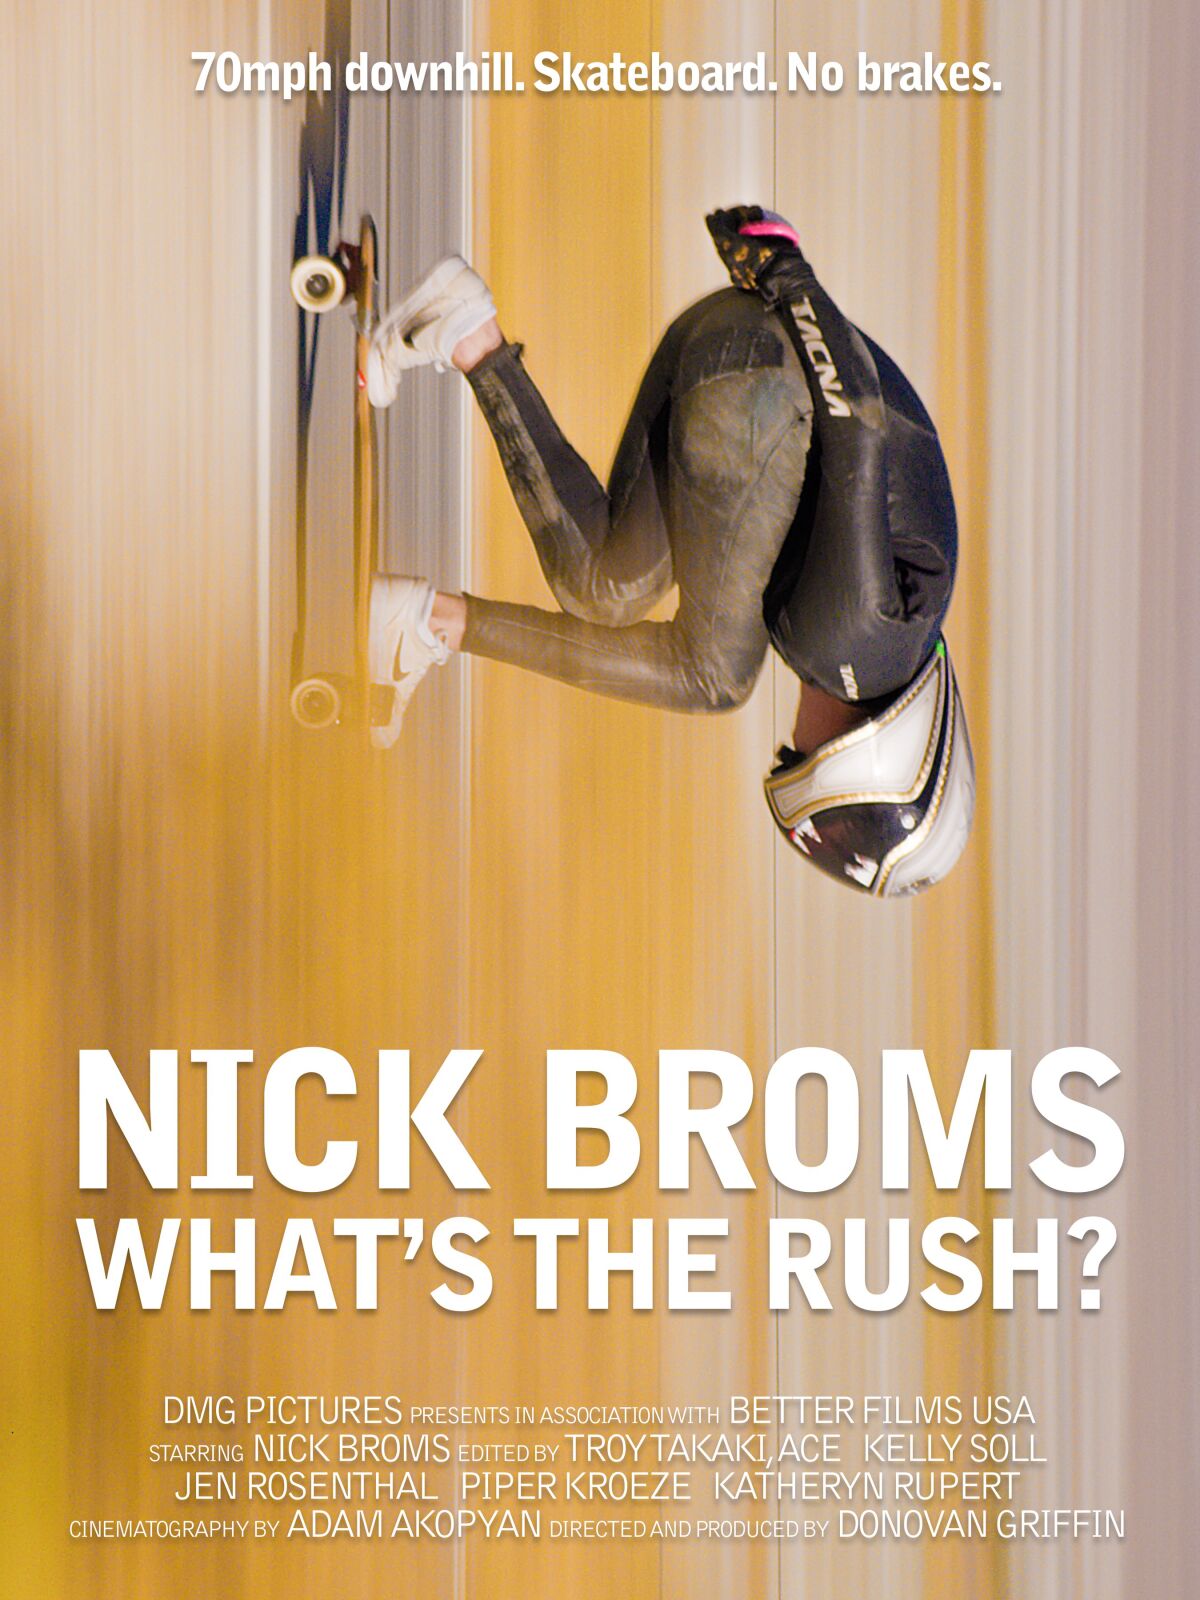 La Jolla native and professional skateboarder Nick Broms is the subject of the documentary "Nick Broms: What's the Rush?"